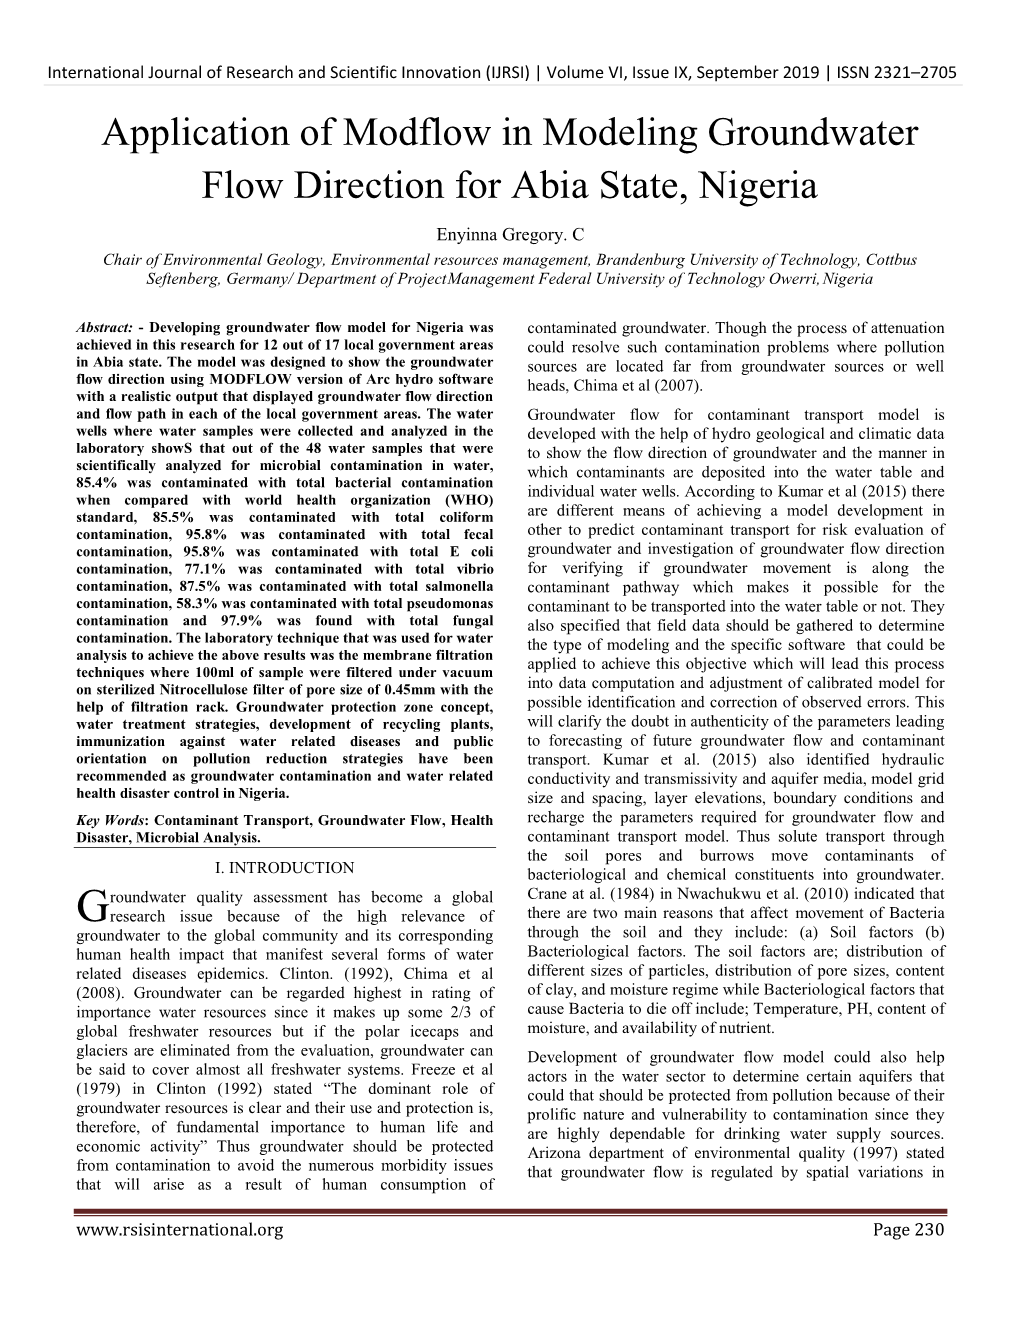 Application of Modflow in Modeling Groundwater Flow Direction for Abia State, Nigeria